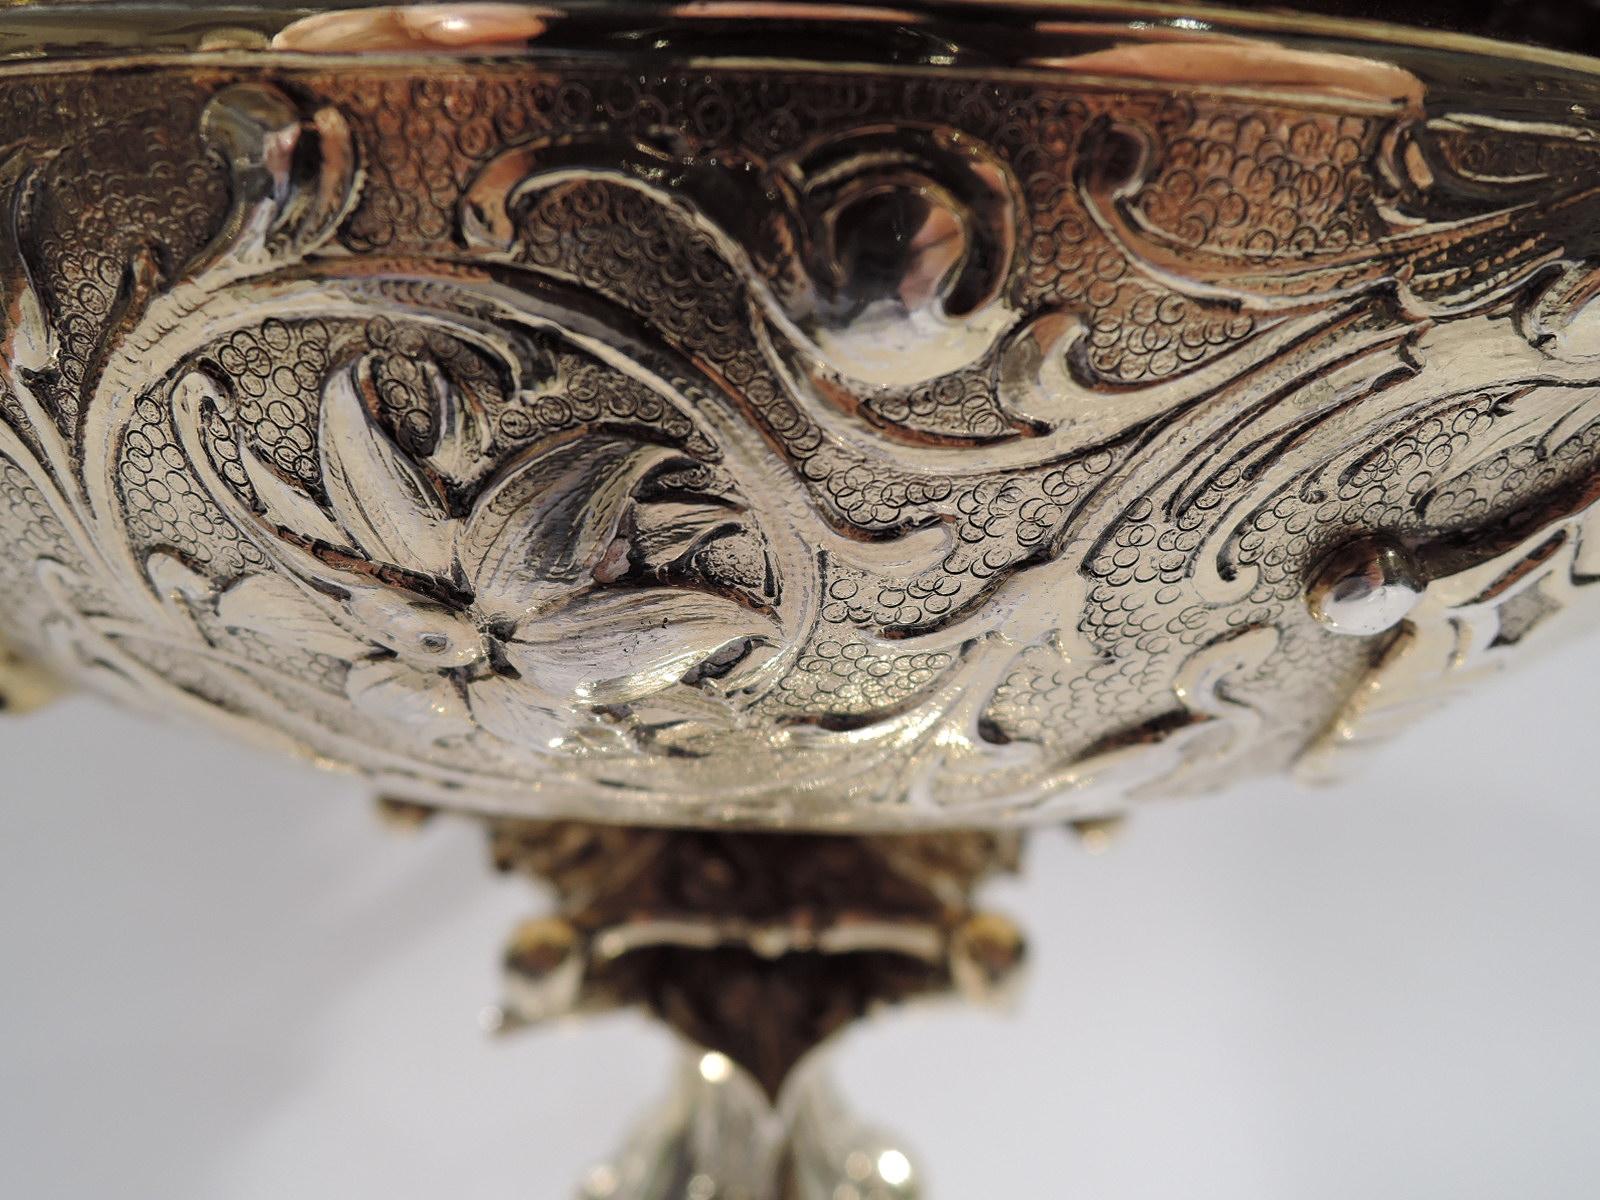 Mid-19th Century Souvenir of Raj India: Governor's Cup Poona Race Trophy, 1919